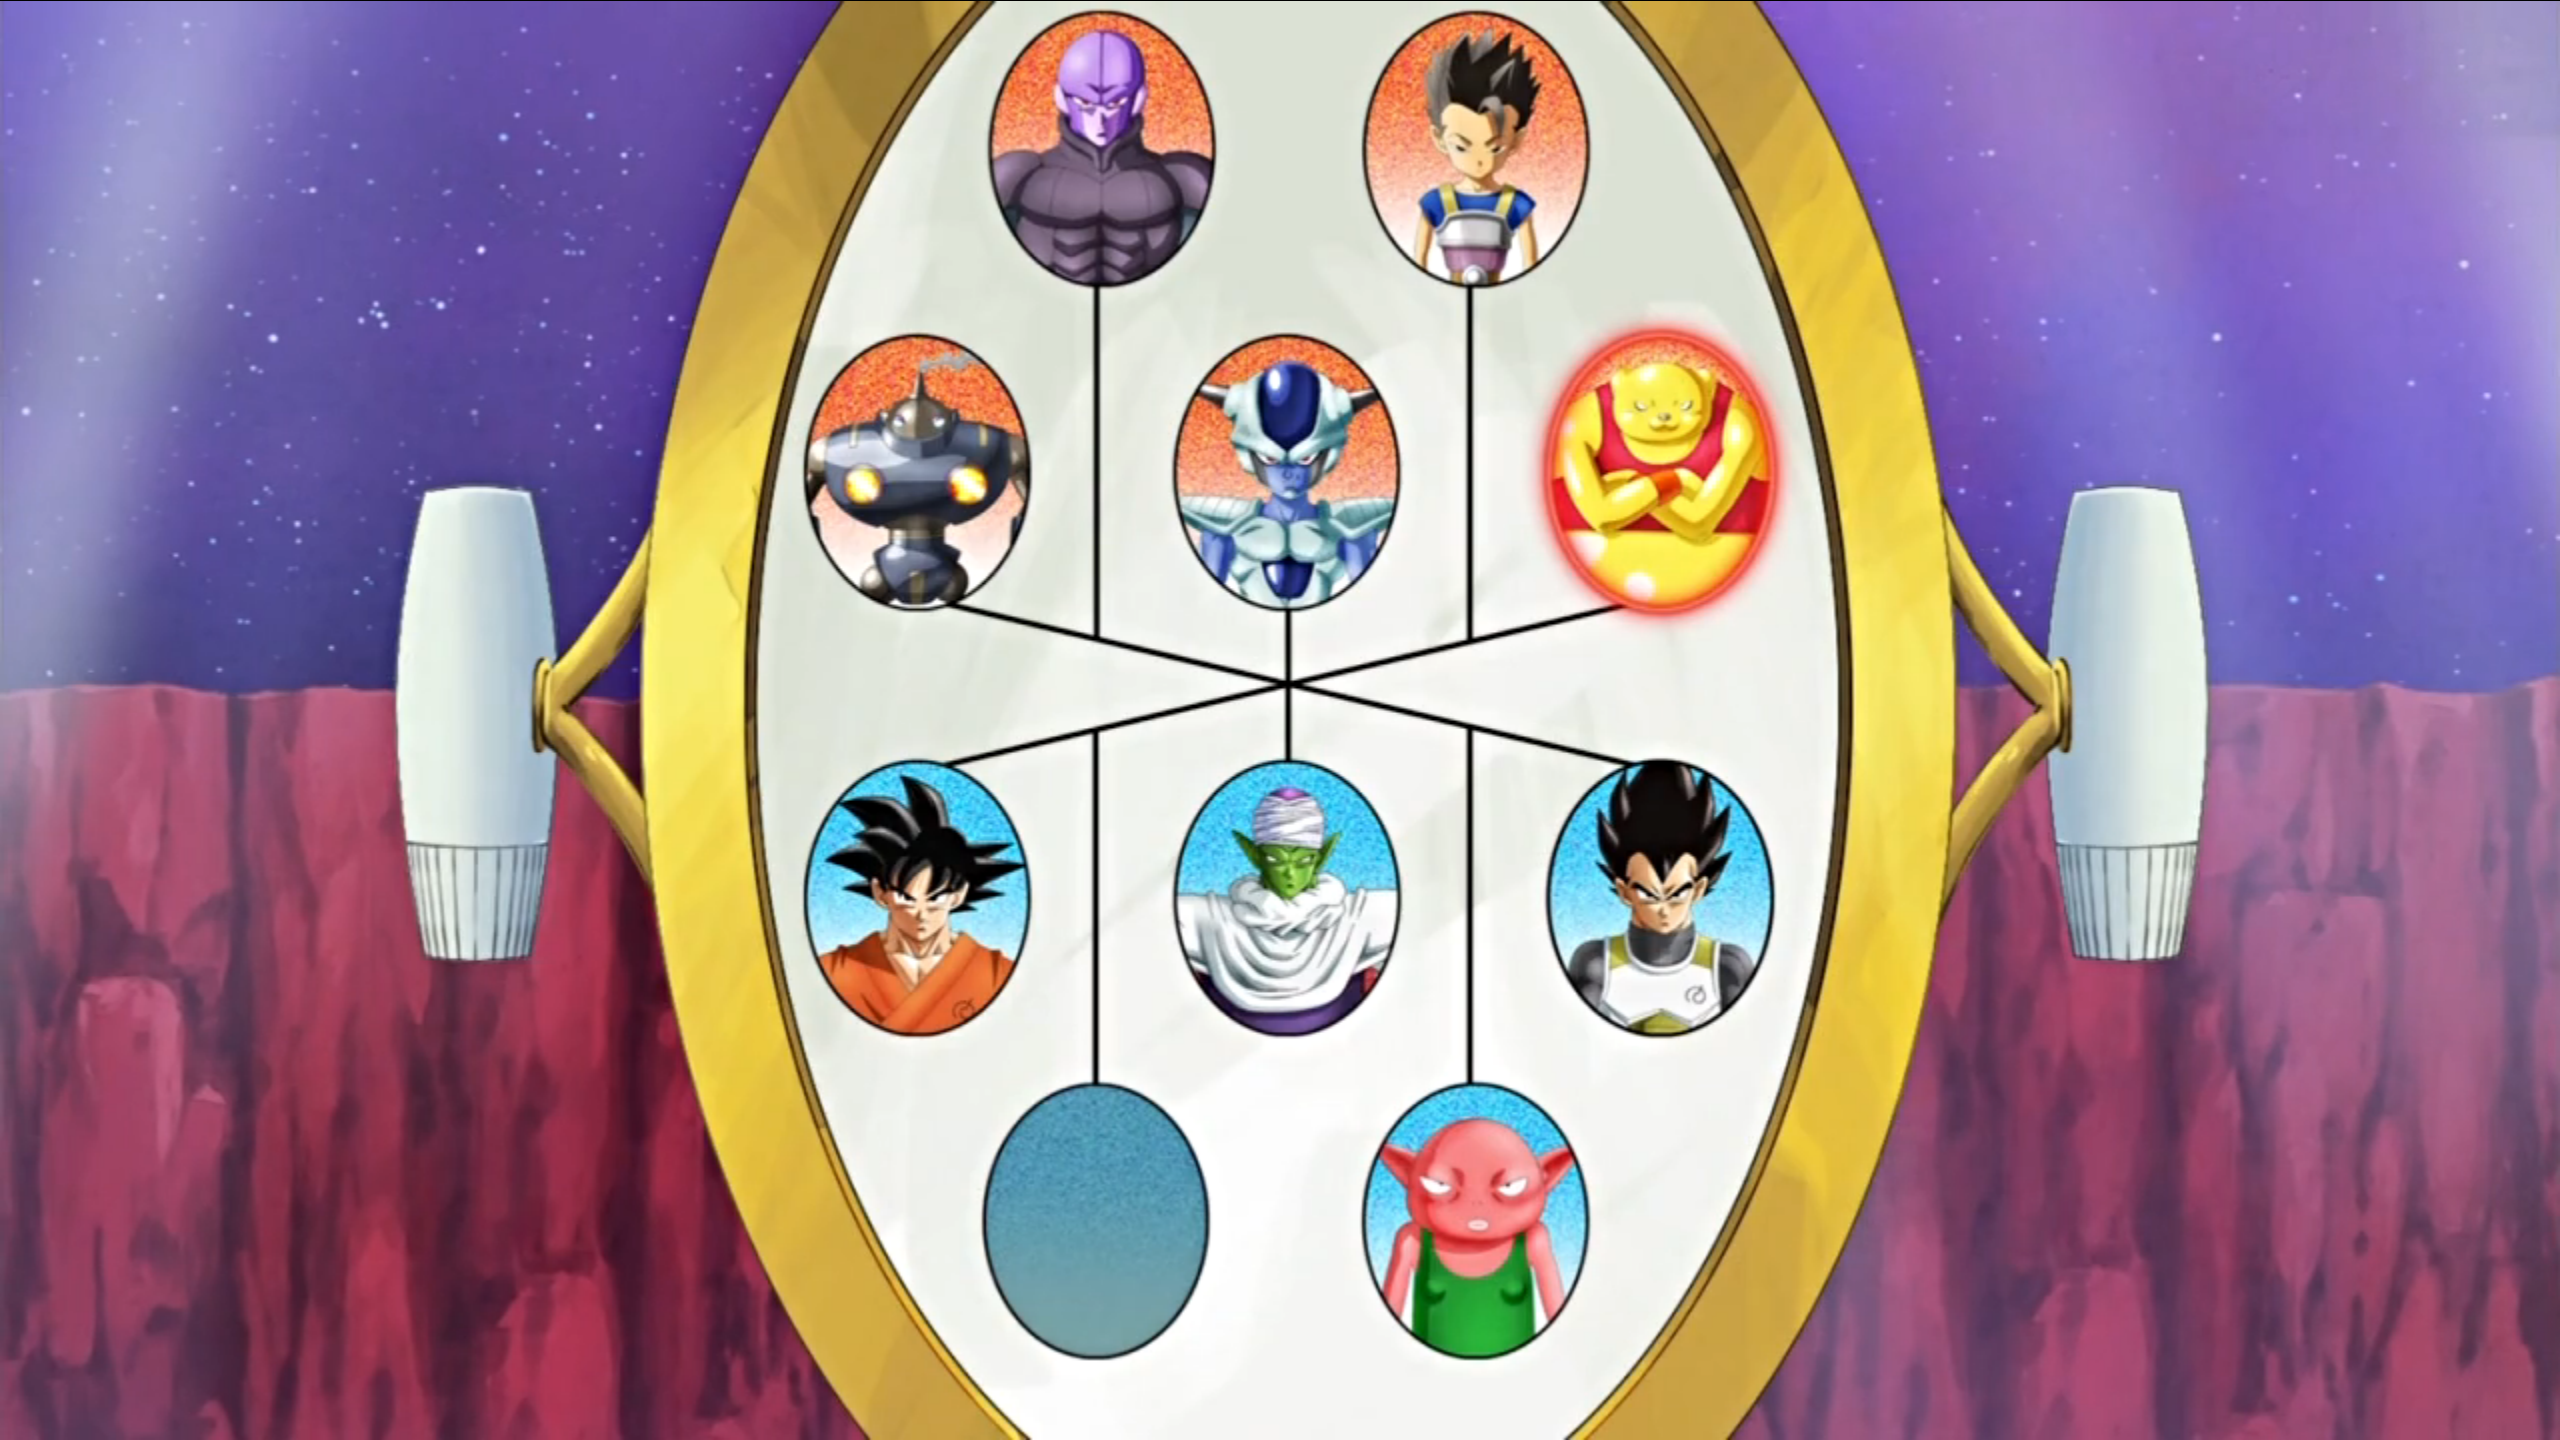 https://static.wikia.nocookie.net/dragonball/images/c/c9/Universe6-7TournamentBrackets.png/revision/latest?cb=20160223221811